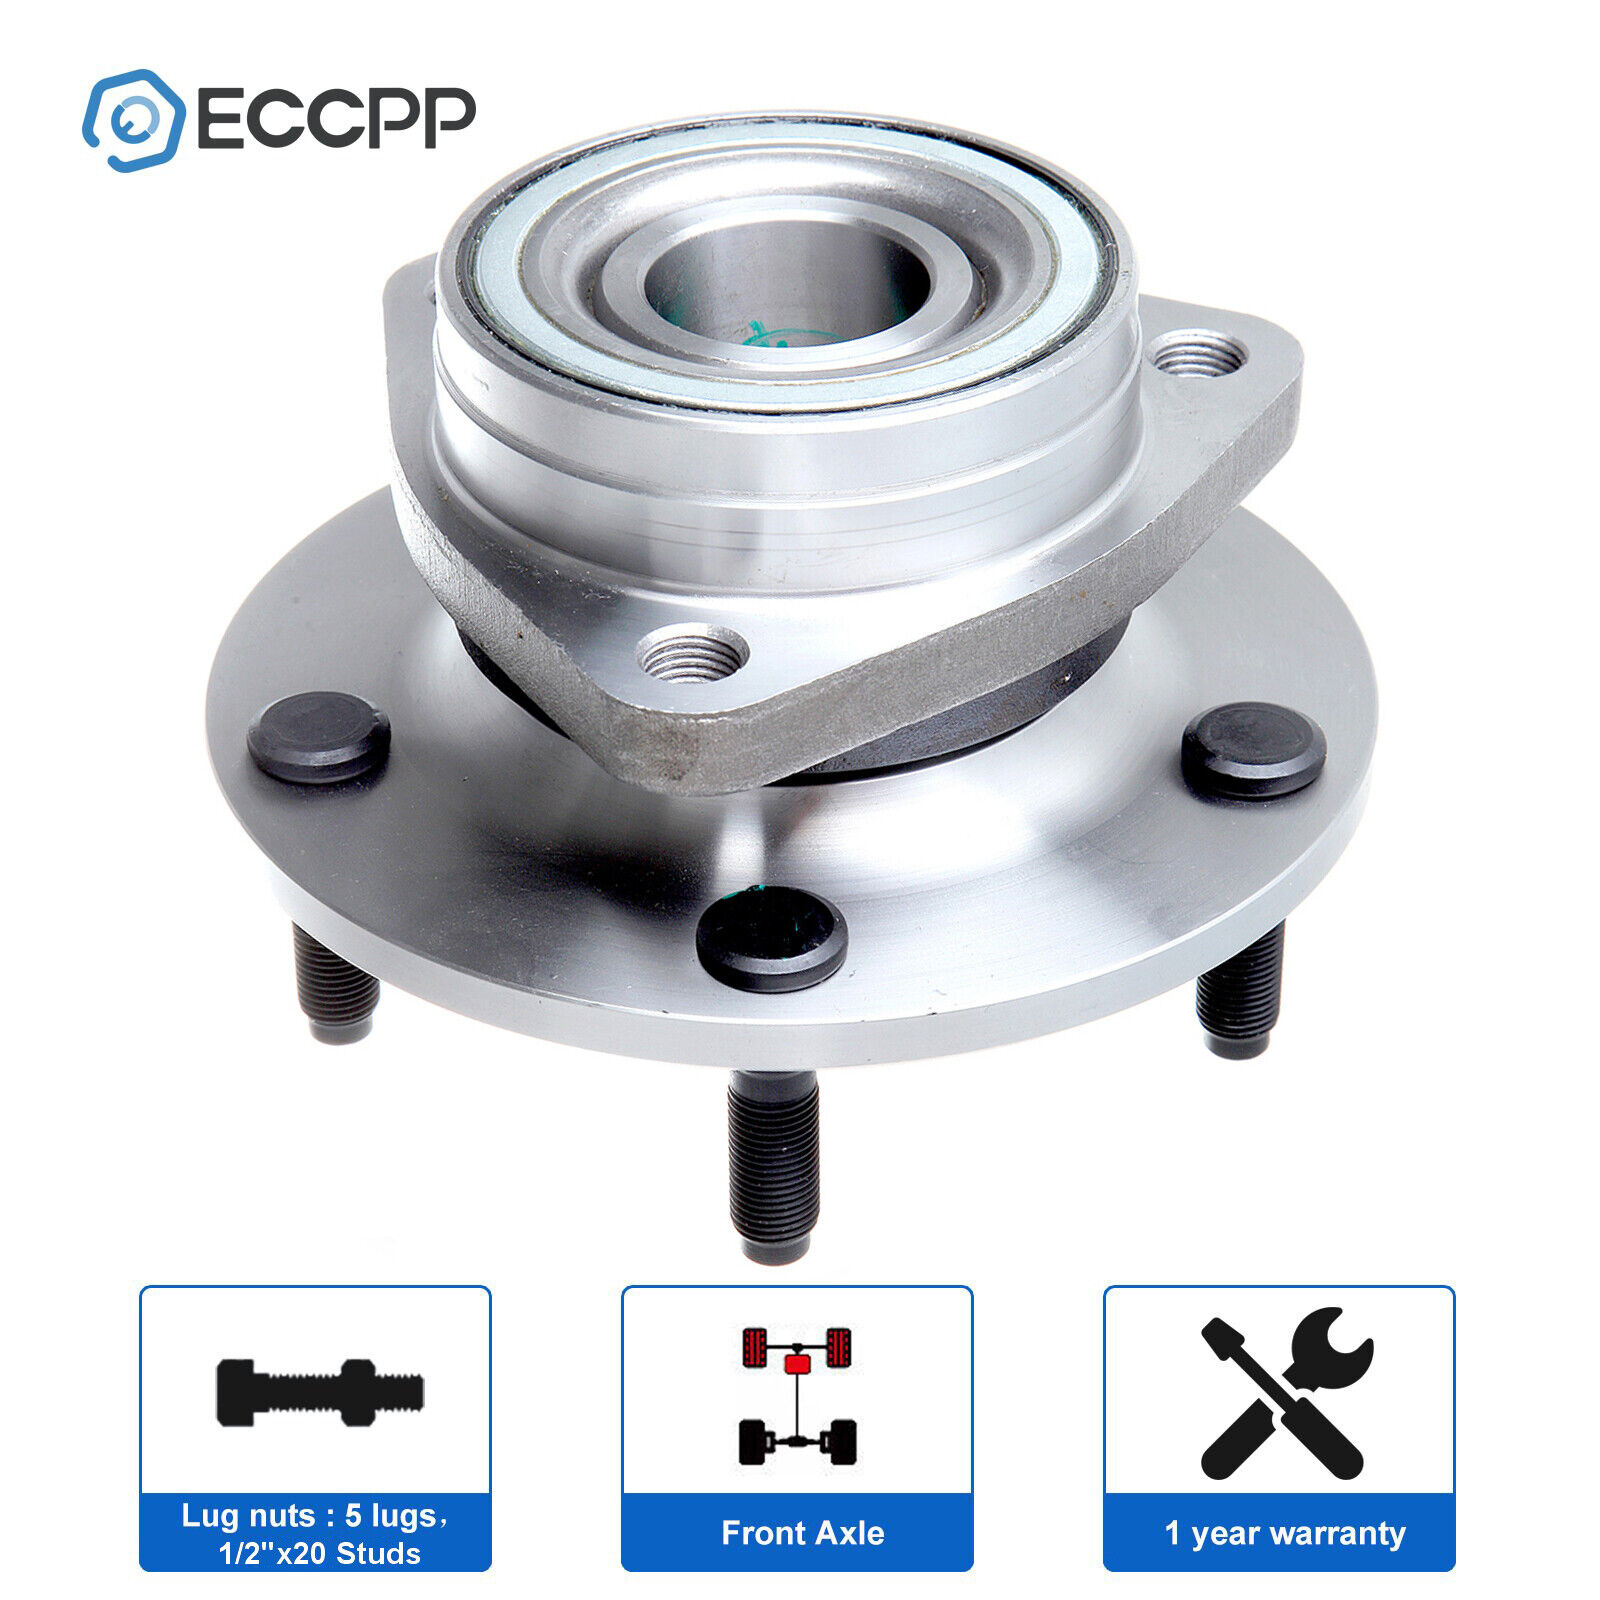 ECCPP 1 Pcs Wheel Hub Bearing Assembly Front For Dodge Ram 1500 1994-1999 4WD